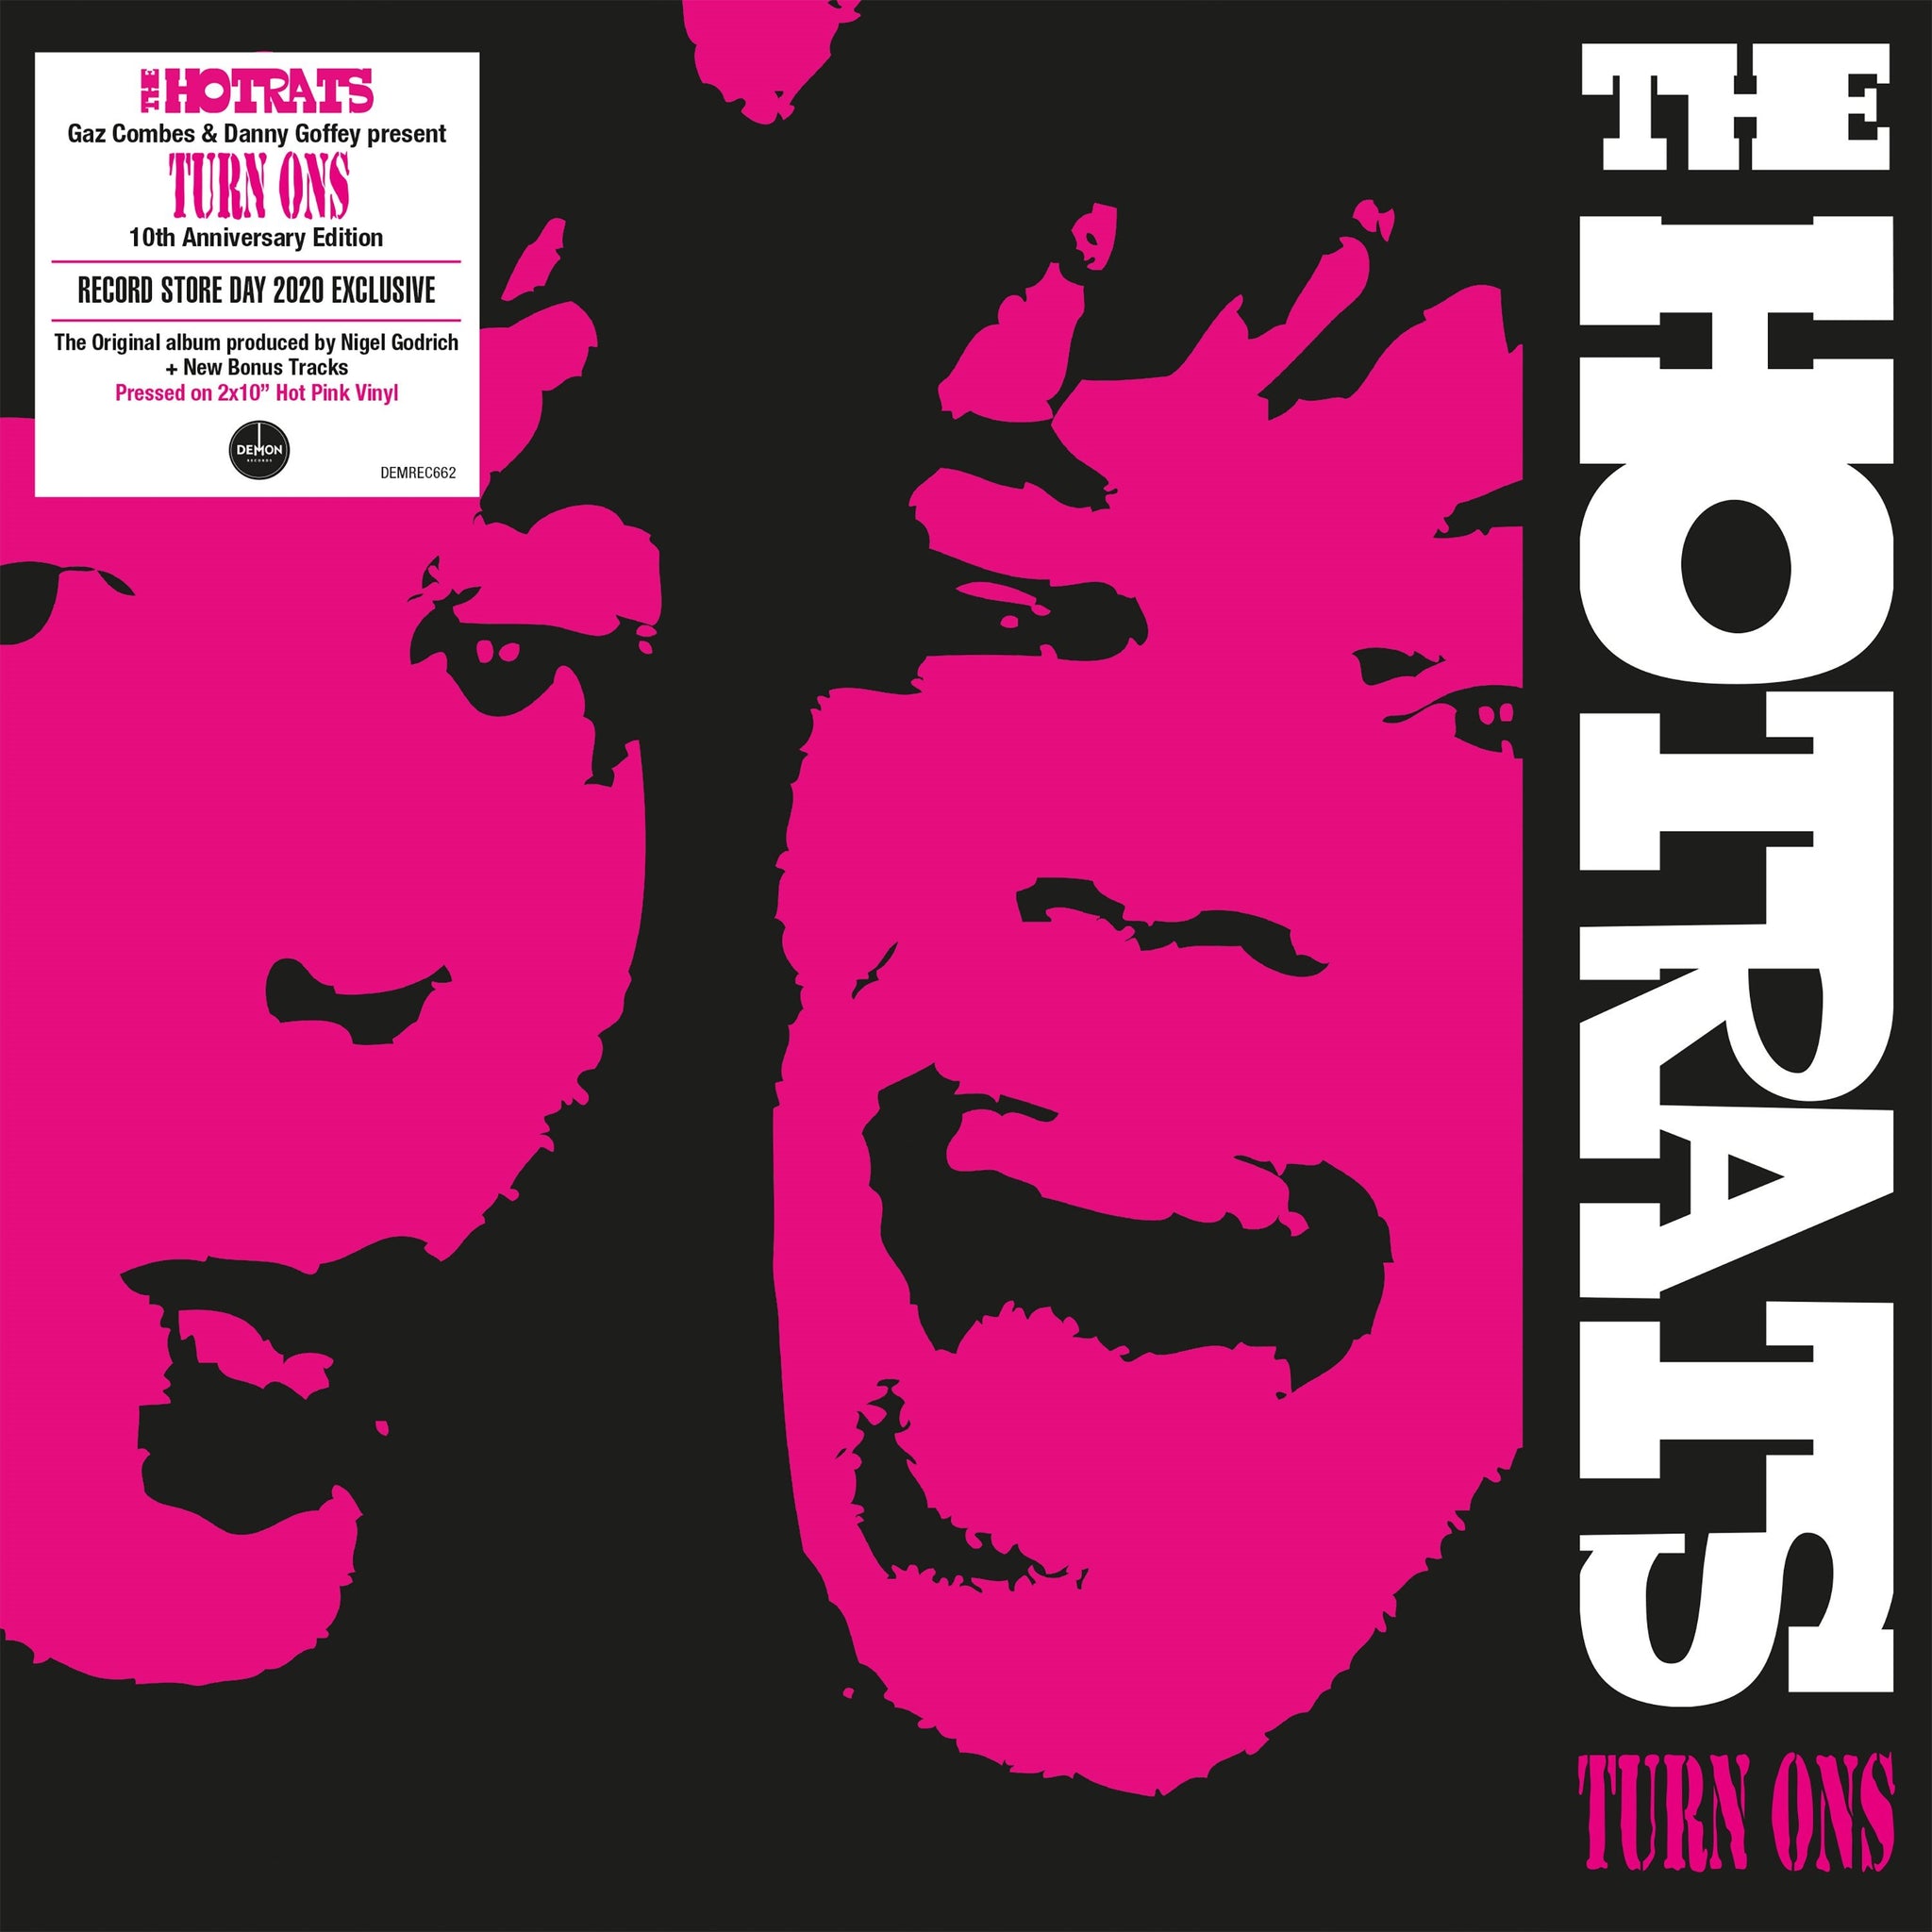 The Hotrats - Turn Ons - 10th Anniversary Edition